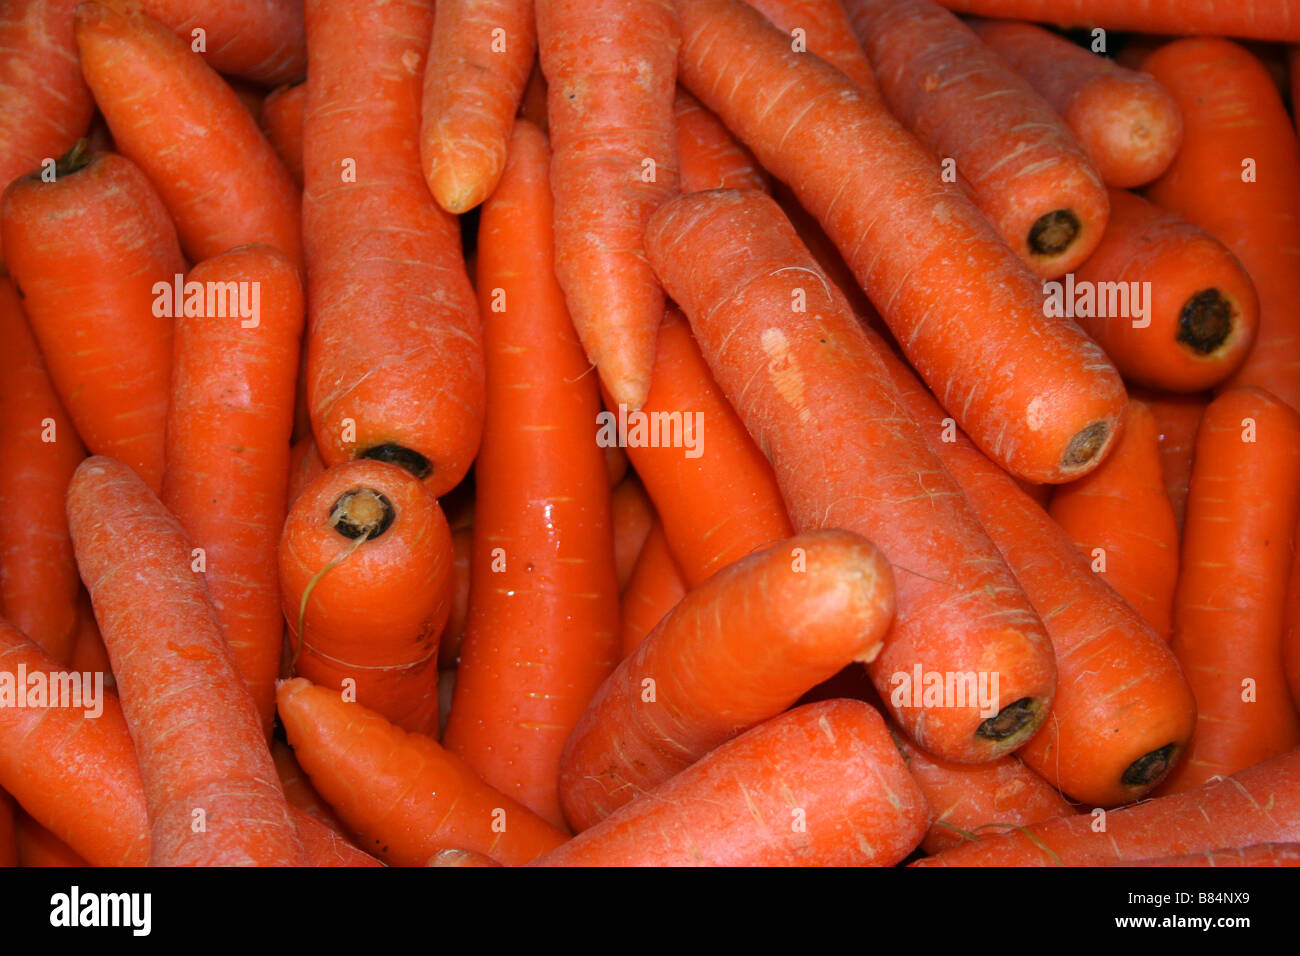 carrots root vegetables Stock Photo